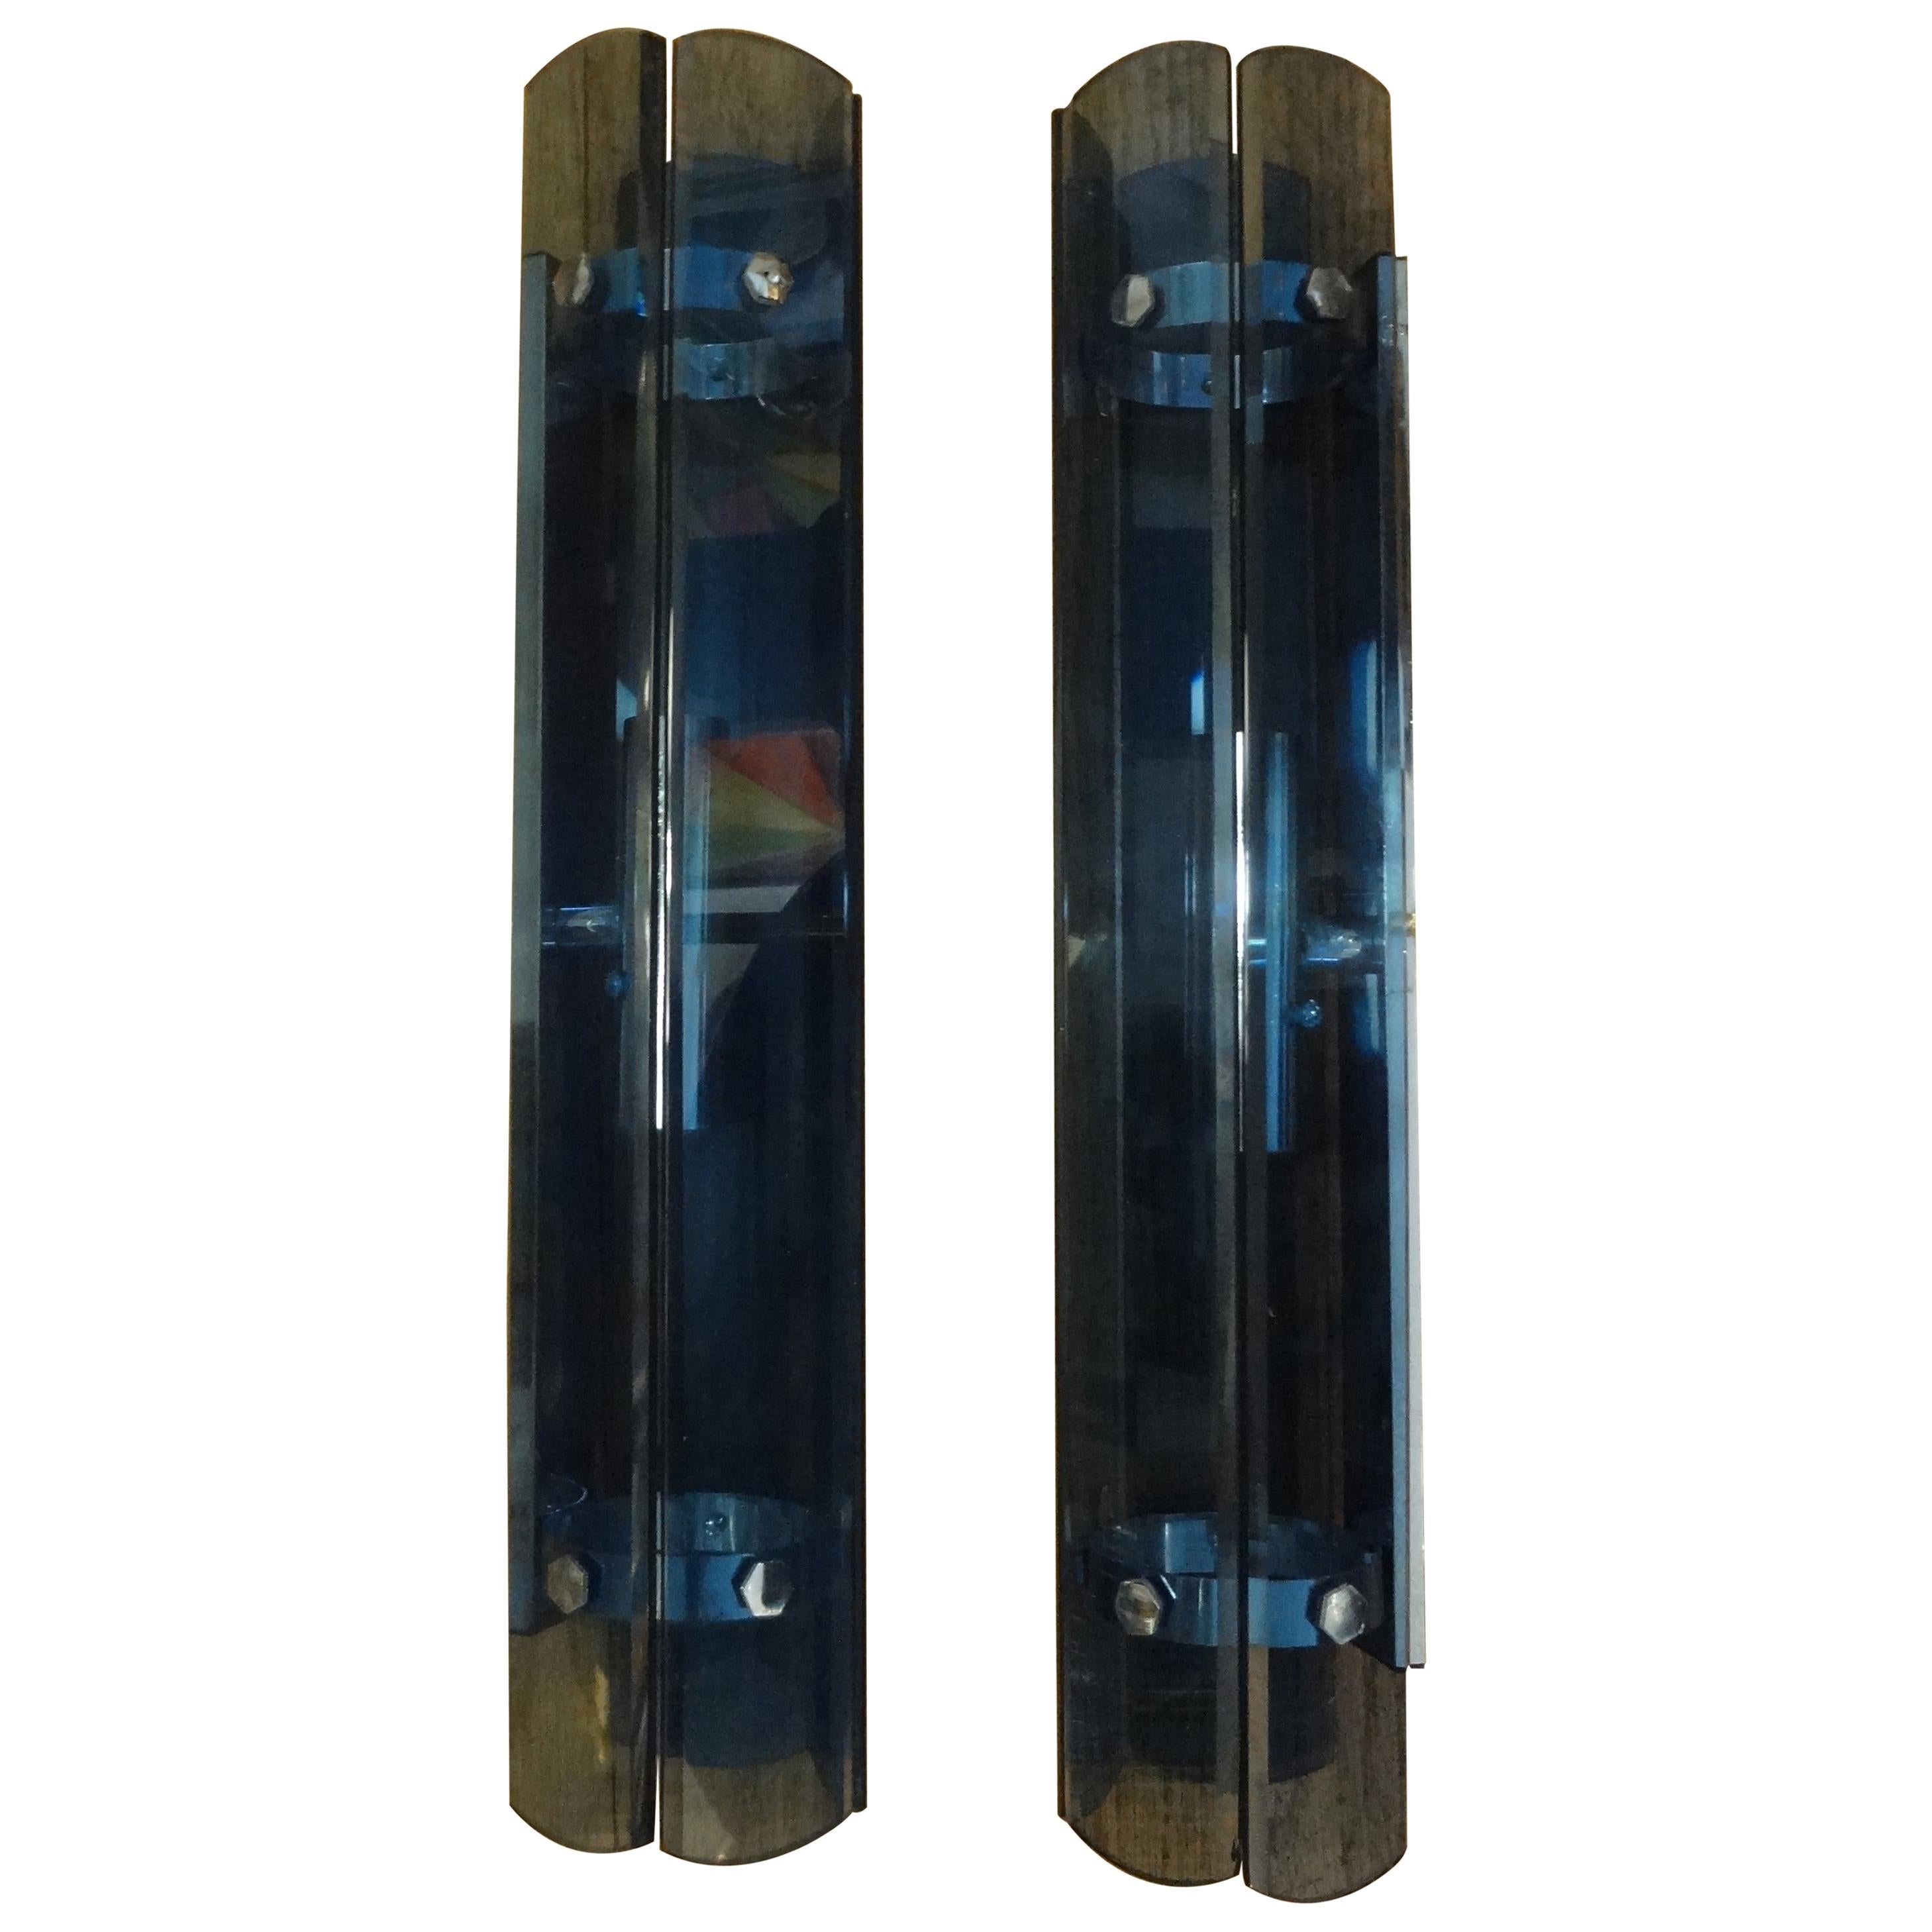 Stunning pair of Italian Fontana Arte style quadrilateral blue glass sconces. These great mid-century Max Ingrand for Fontana Arte style Italian blue glass sconces have four sides of beveled glass on chrome structures. Each sconce has been newly